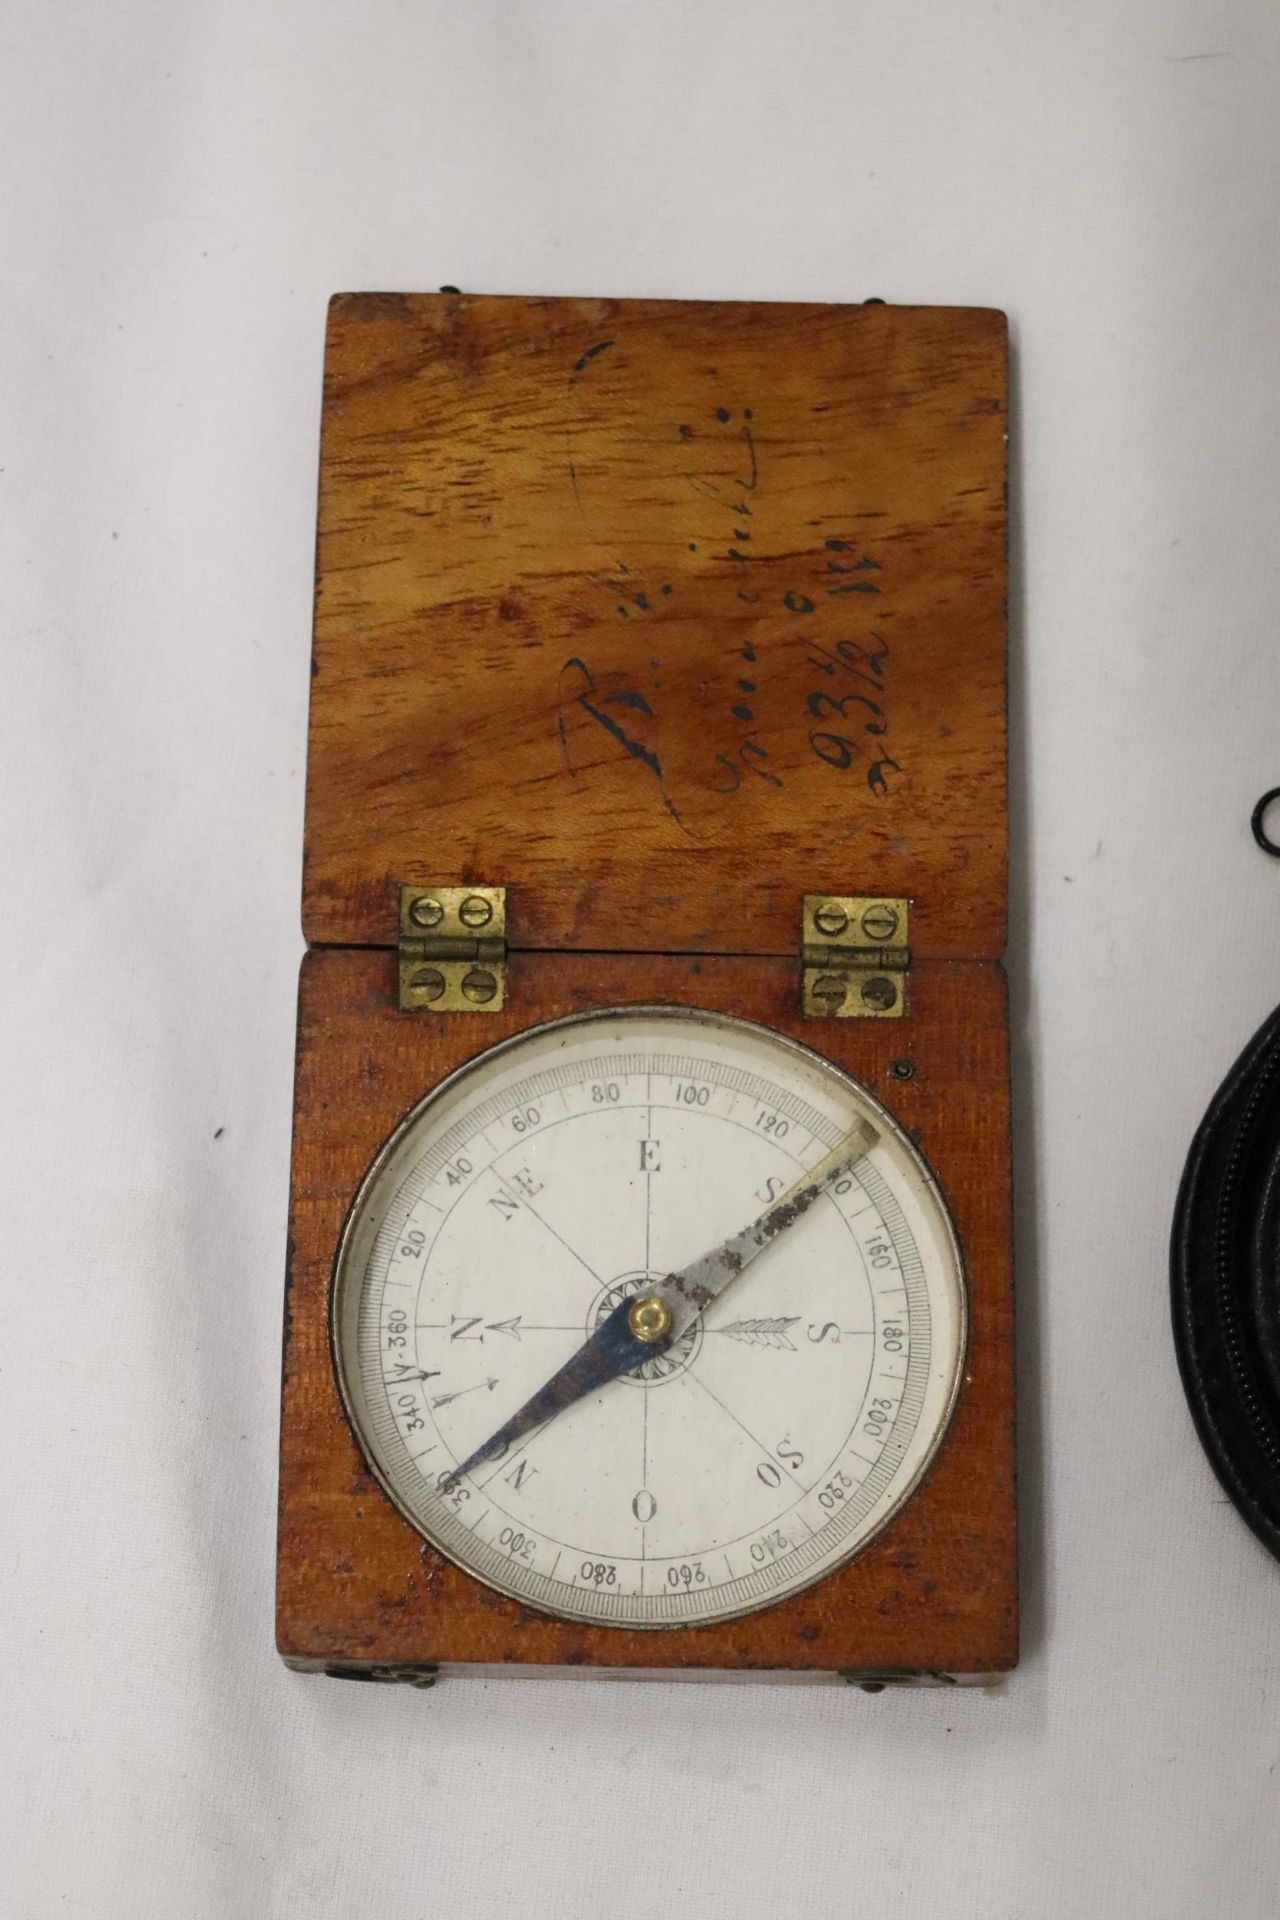 A VINTAGE COMPASS IN AN OAK CASE, A COMPENSATED FOR TEMPERATURE INSTUMENT, MADE BY S & M, DYSON & - Image 2 of 7